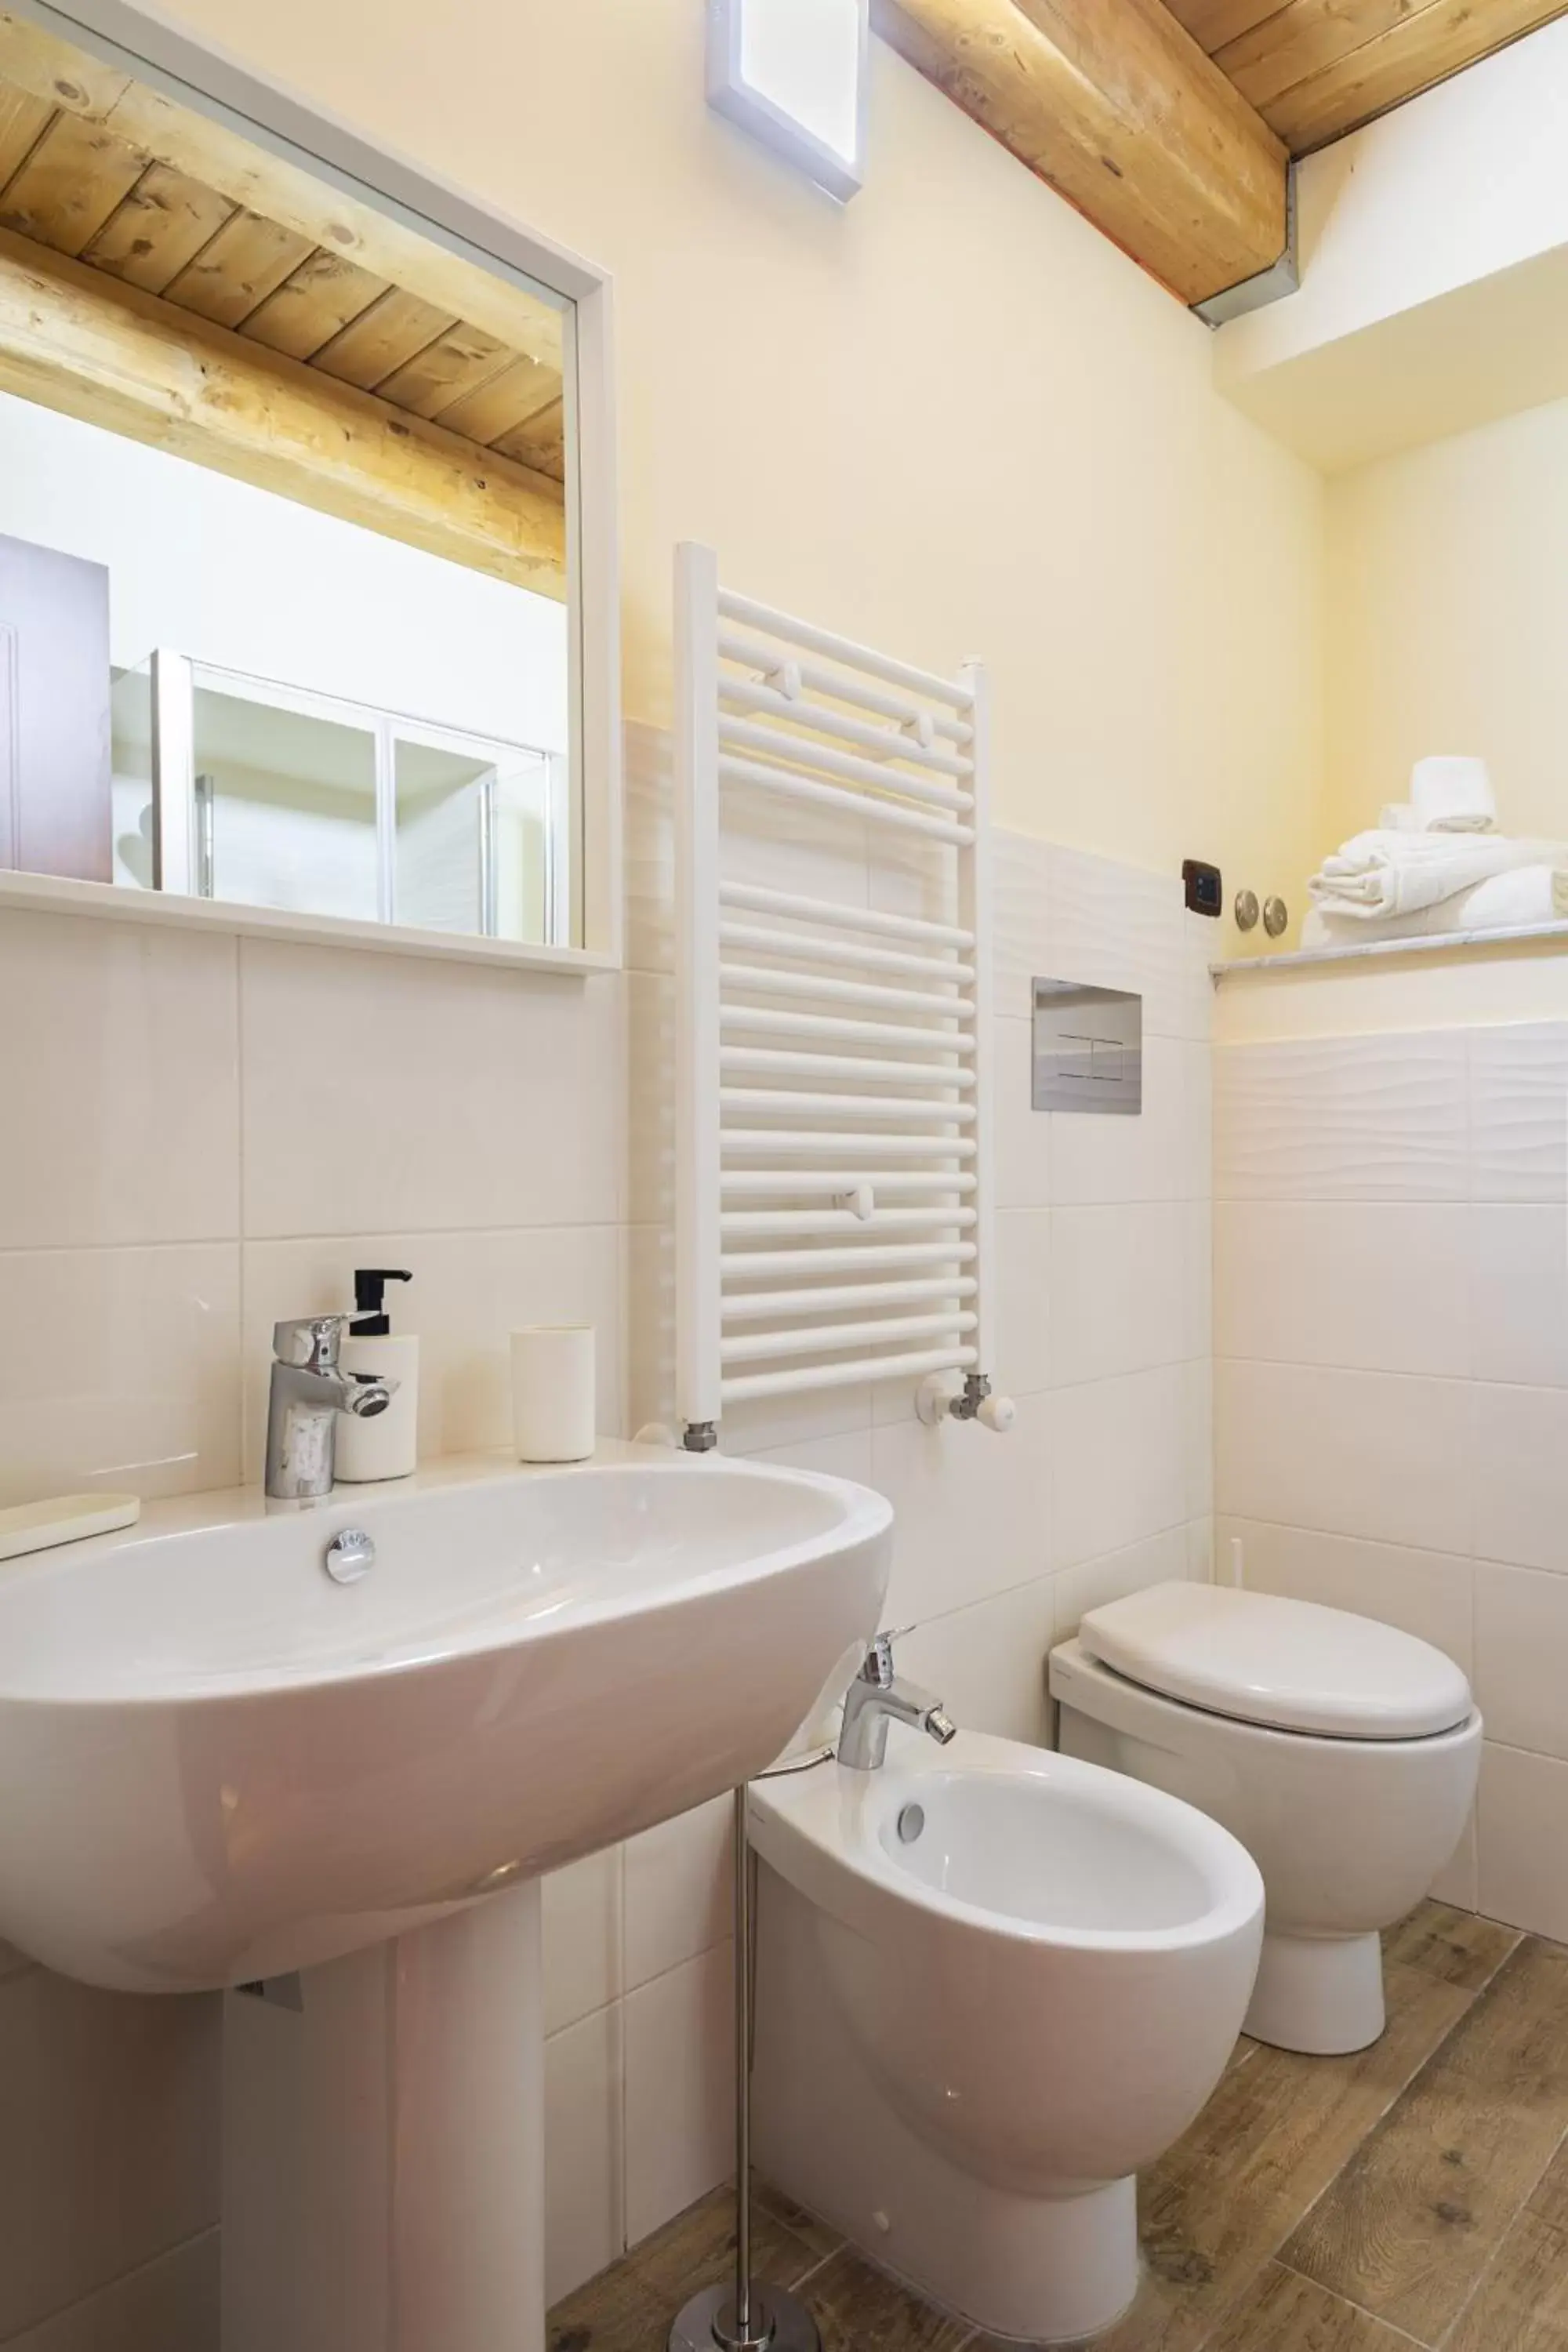 Bathroom in Open Sicily Homes - Residence ai Quattro Canti - Selfcheck-in